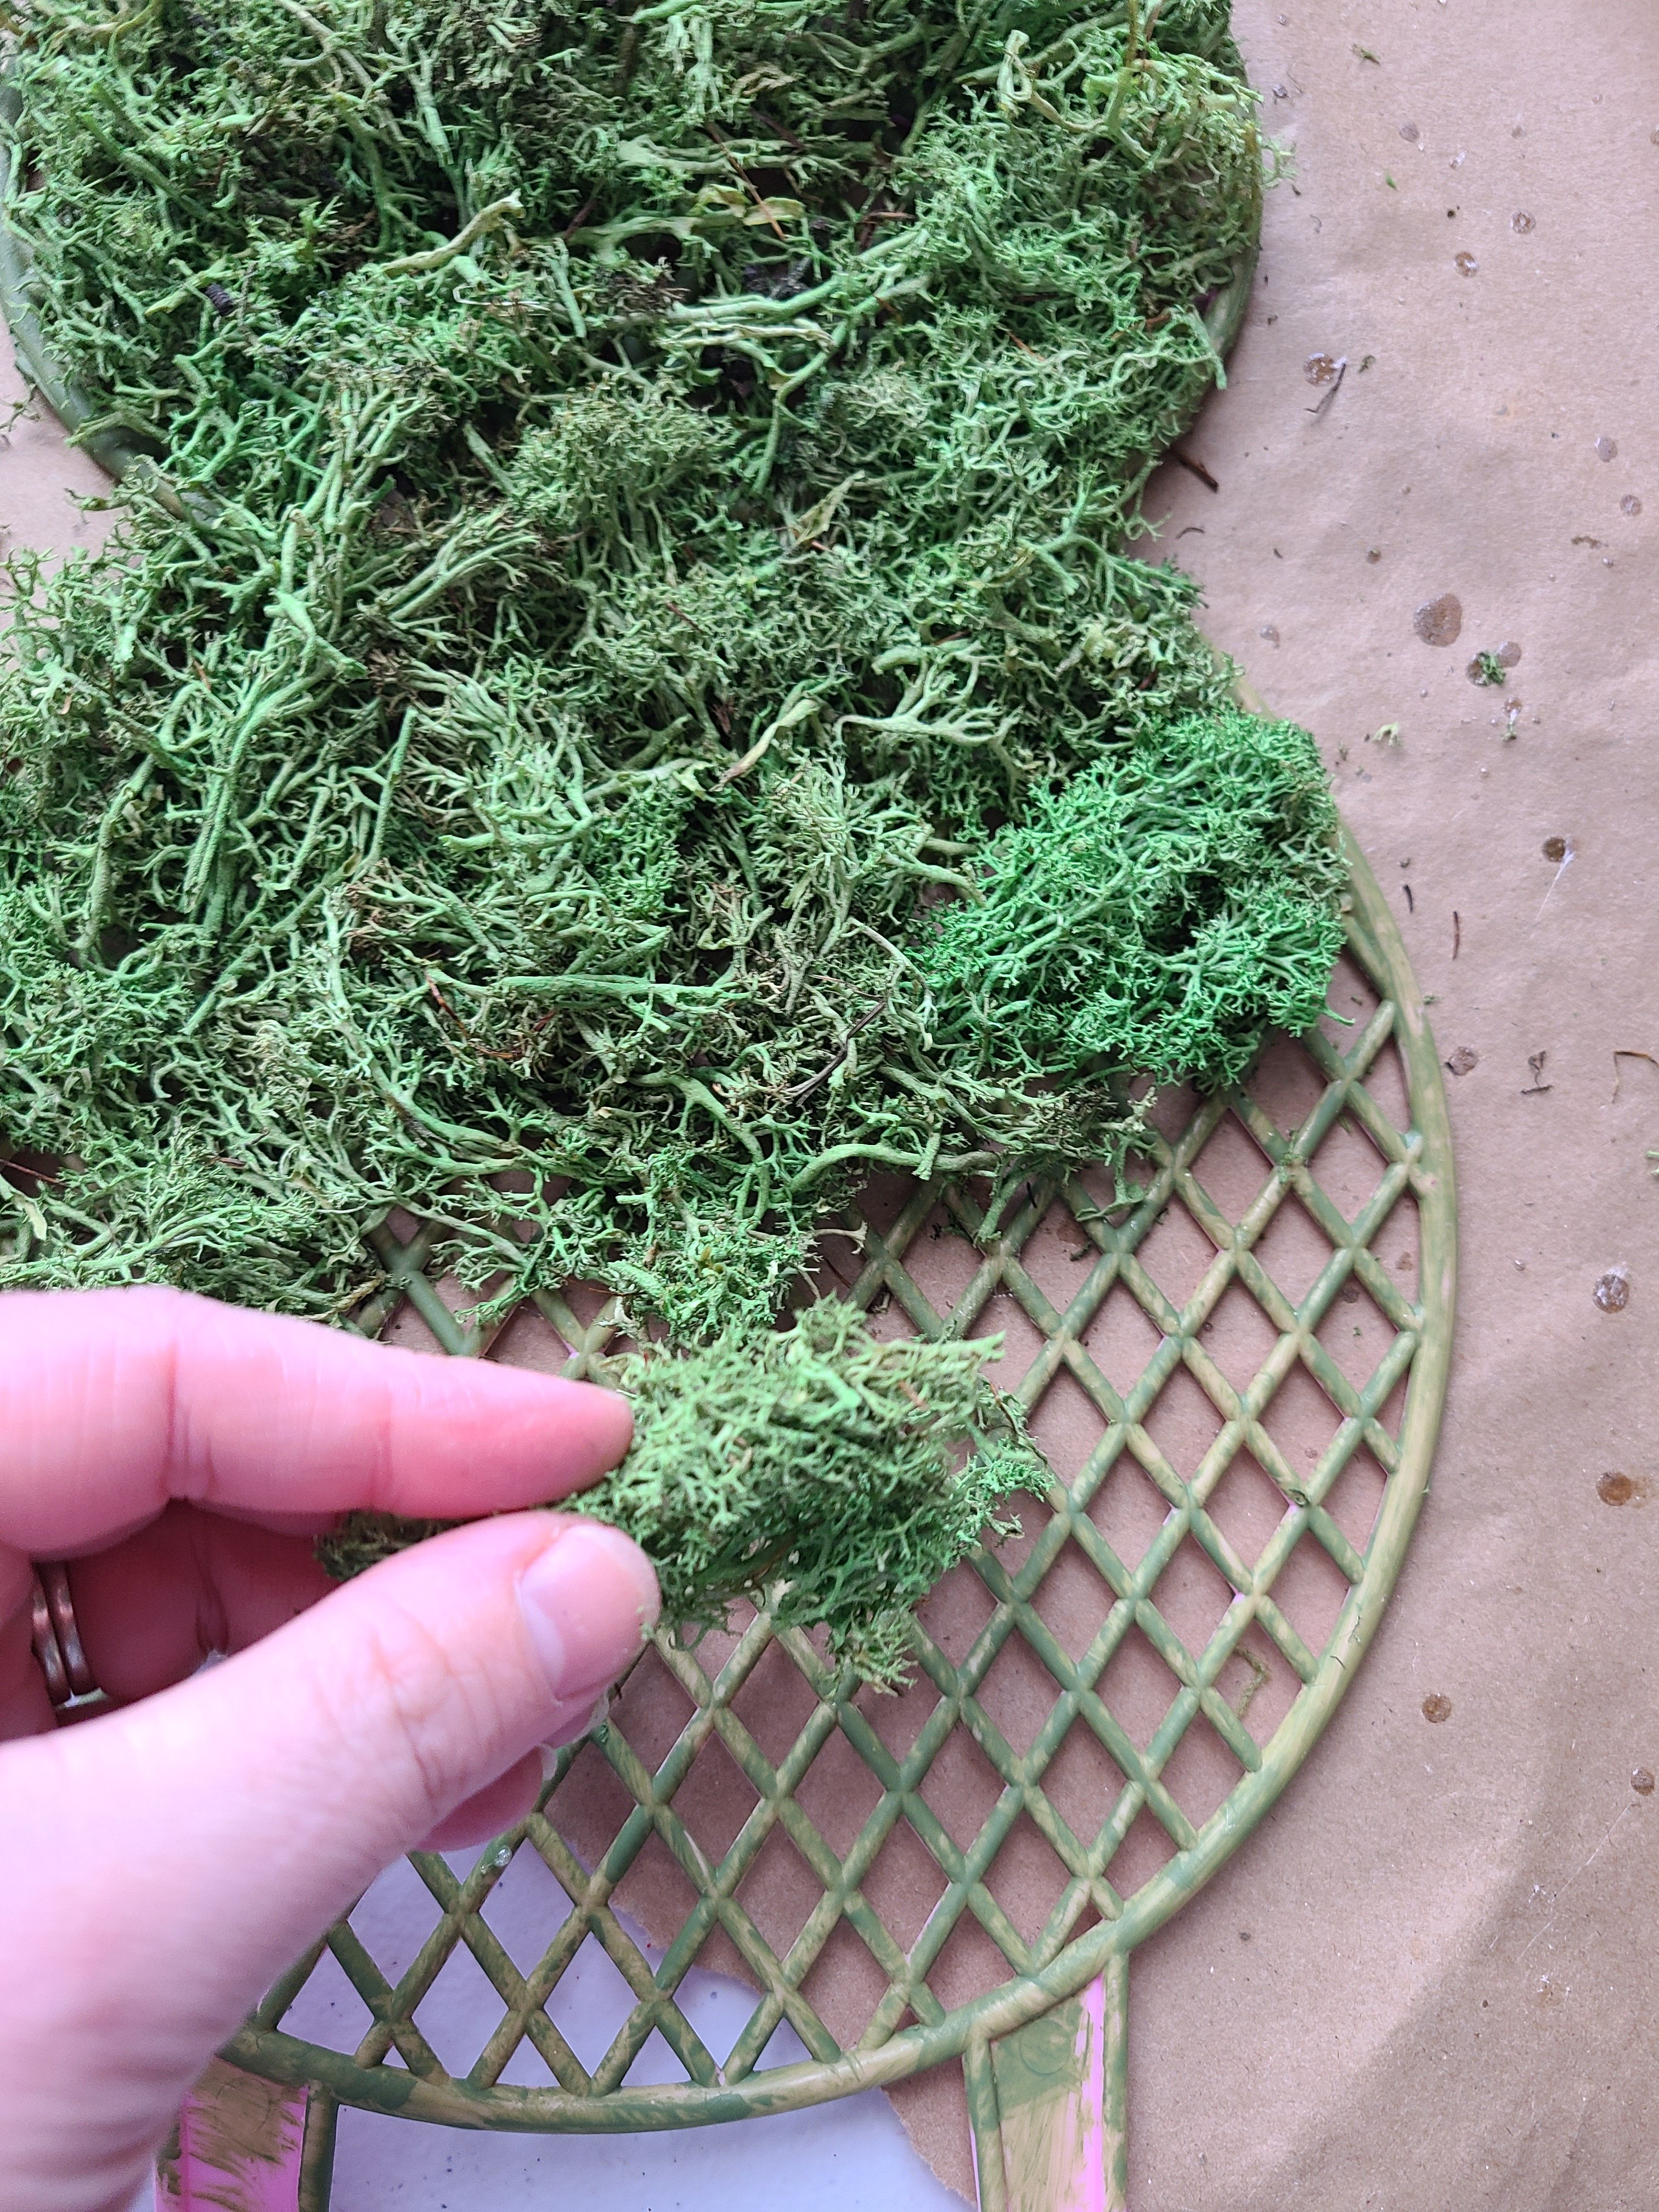 Adding green reindeer moss to the plastic bunny frame.